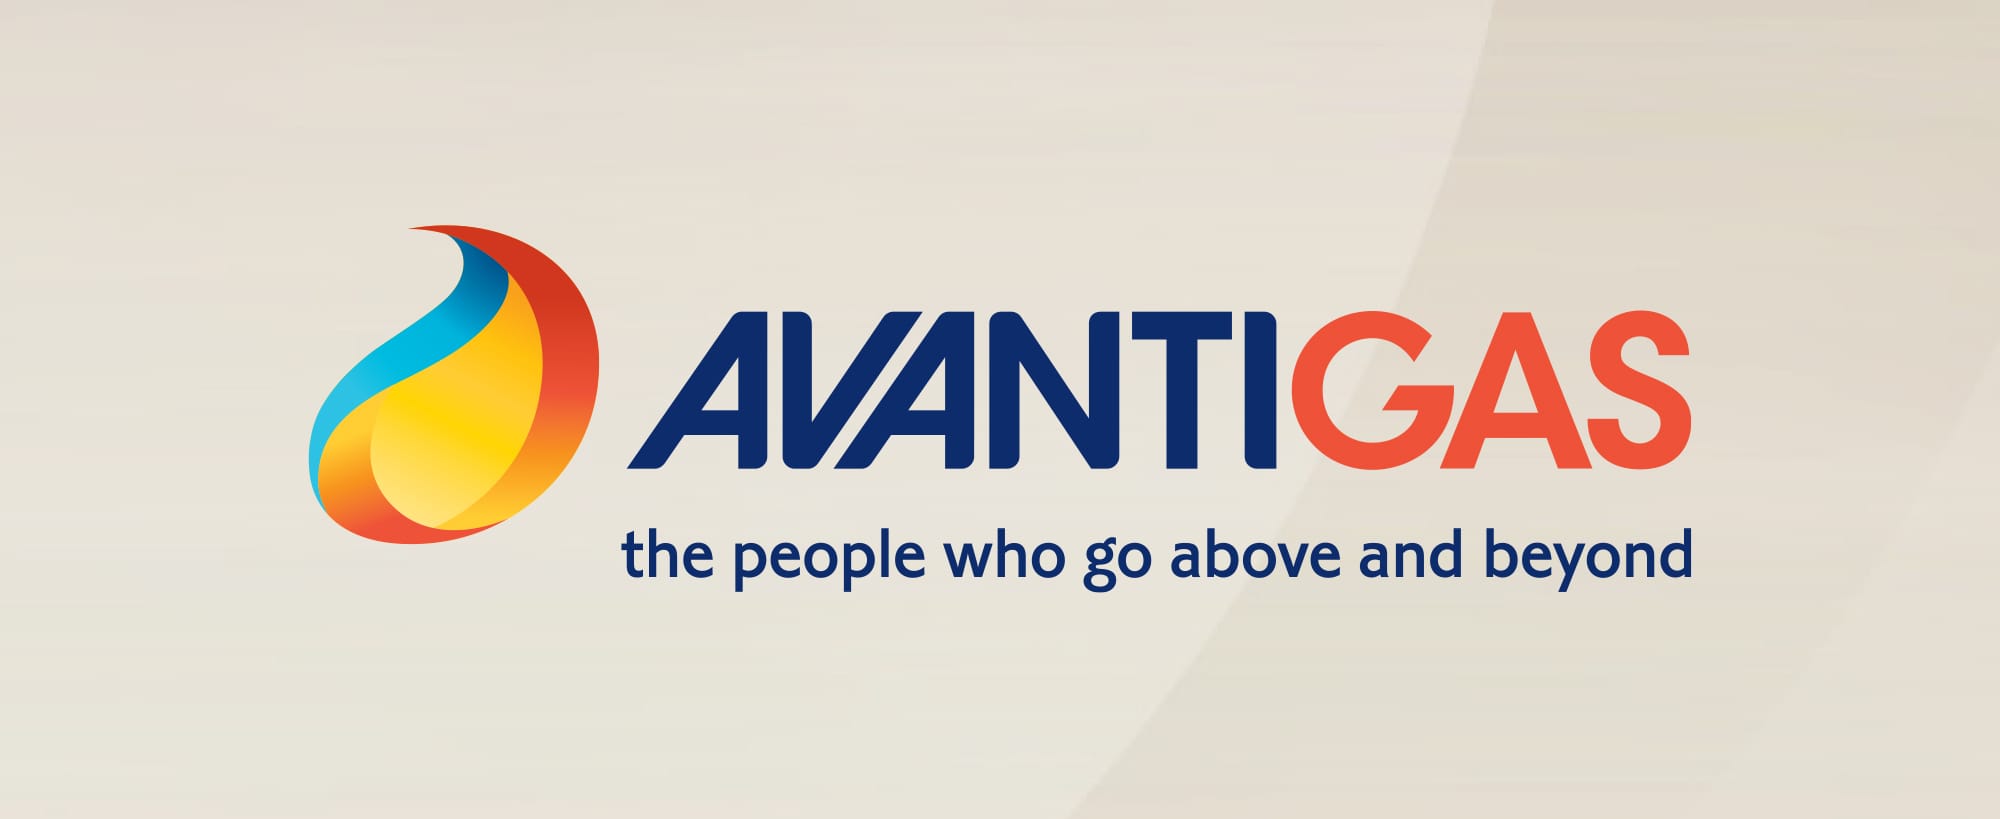 AvantiGas Brand Creation and Brand Guidelines